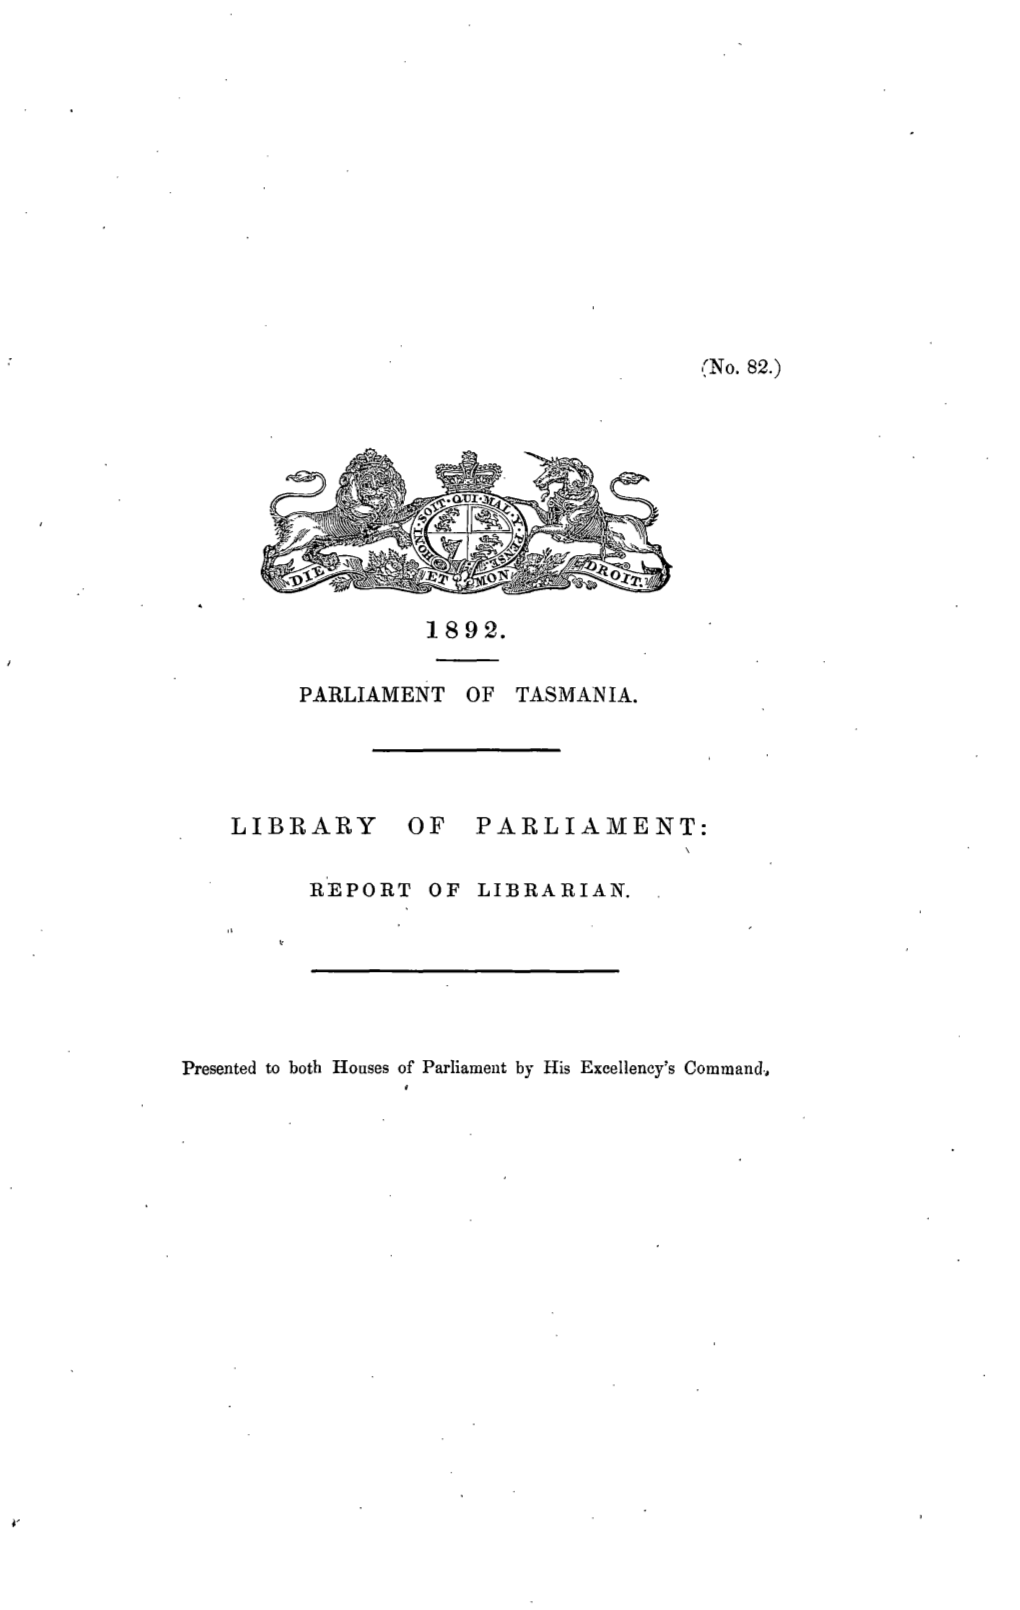 Library of Parliament: Report of Librarian